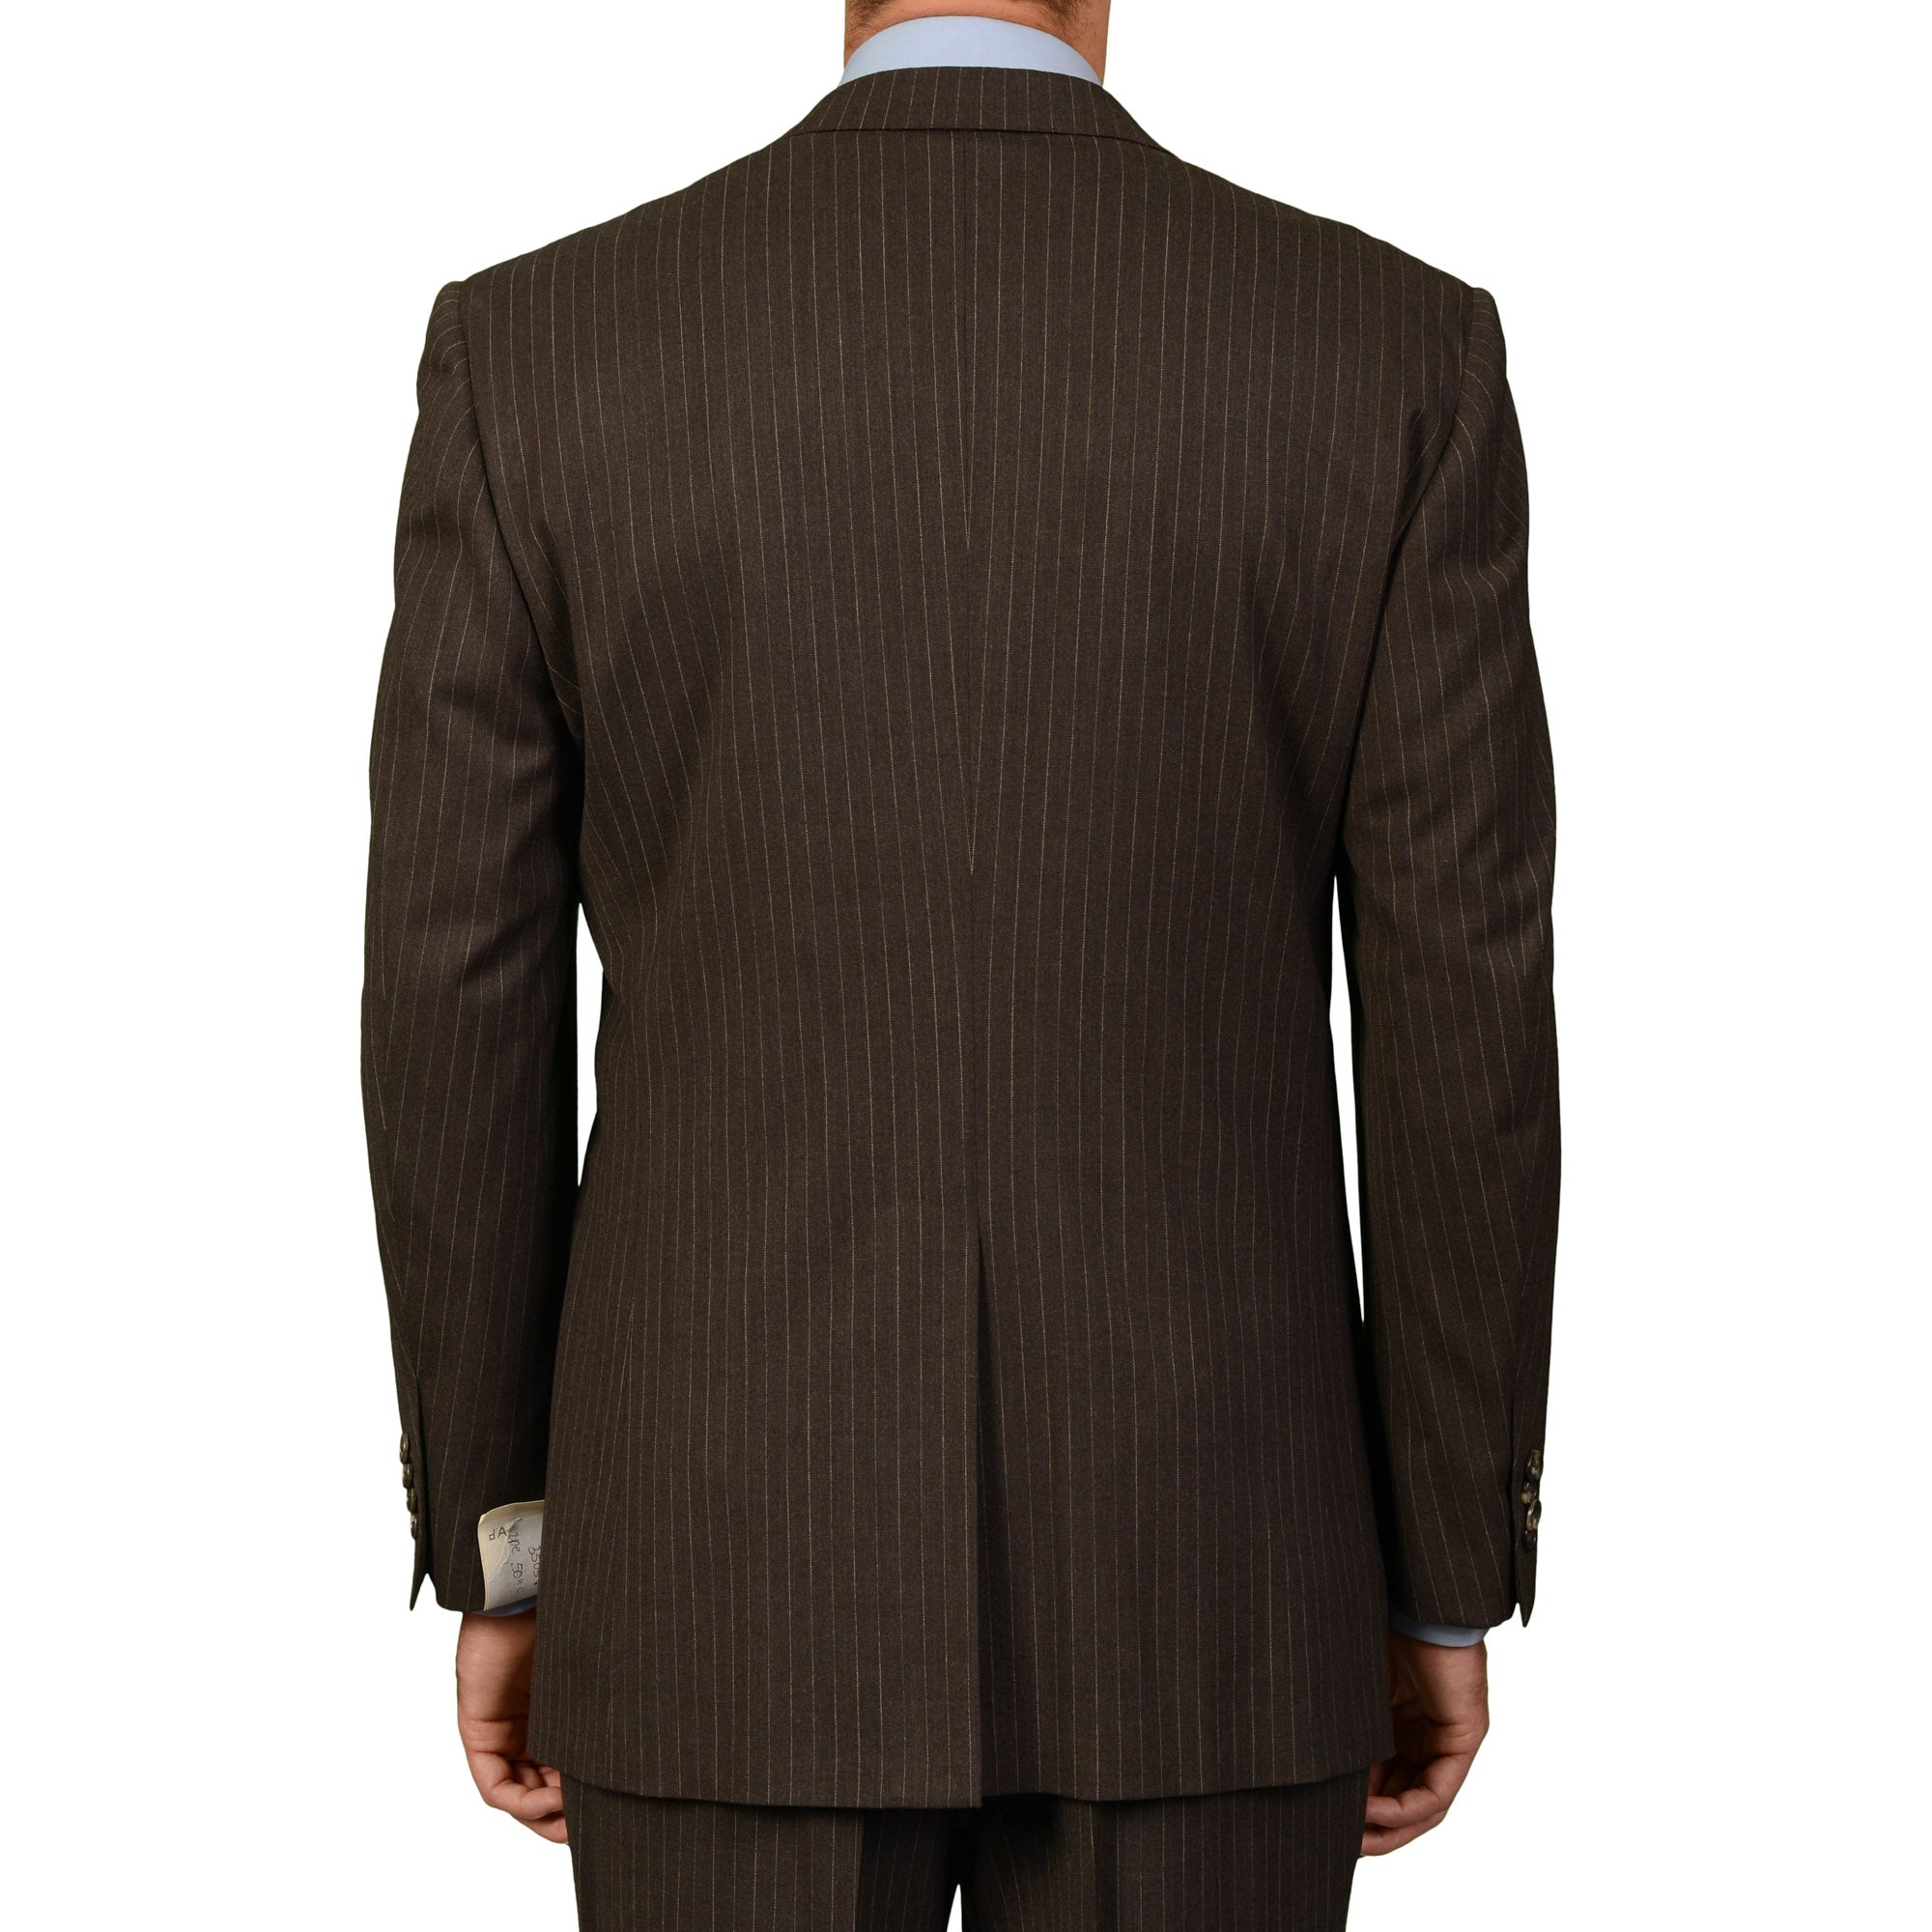 D'AVENZA Roma Handmade Brown Striped Wool DB Suit EU 50 NEW US 40